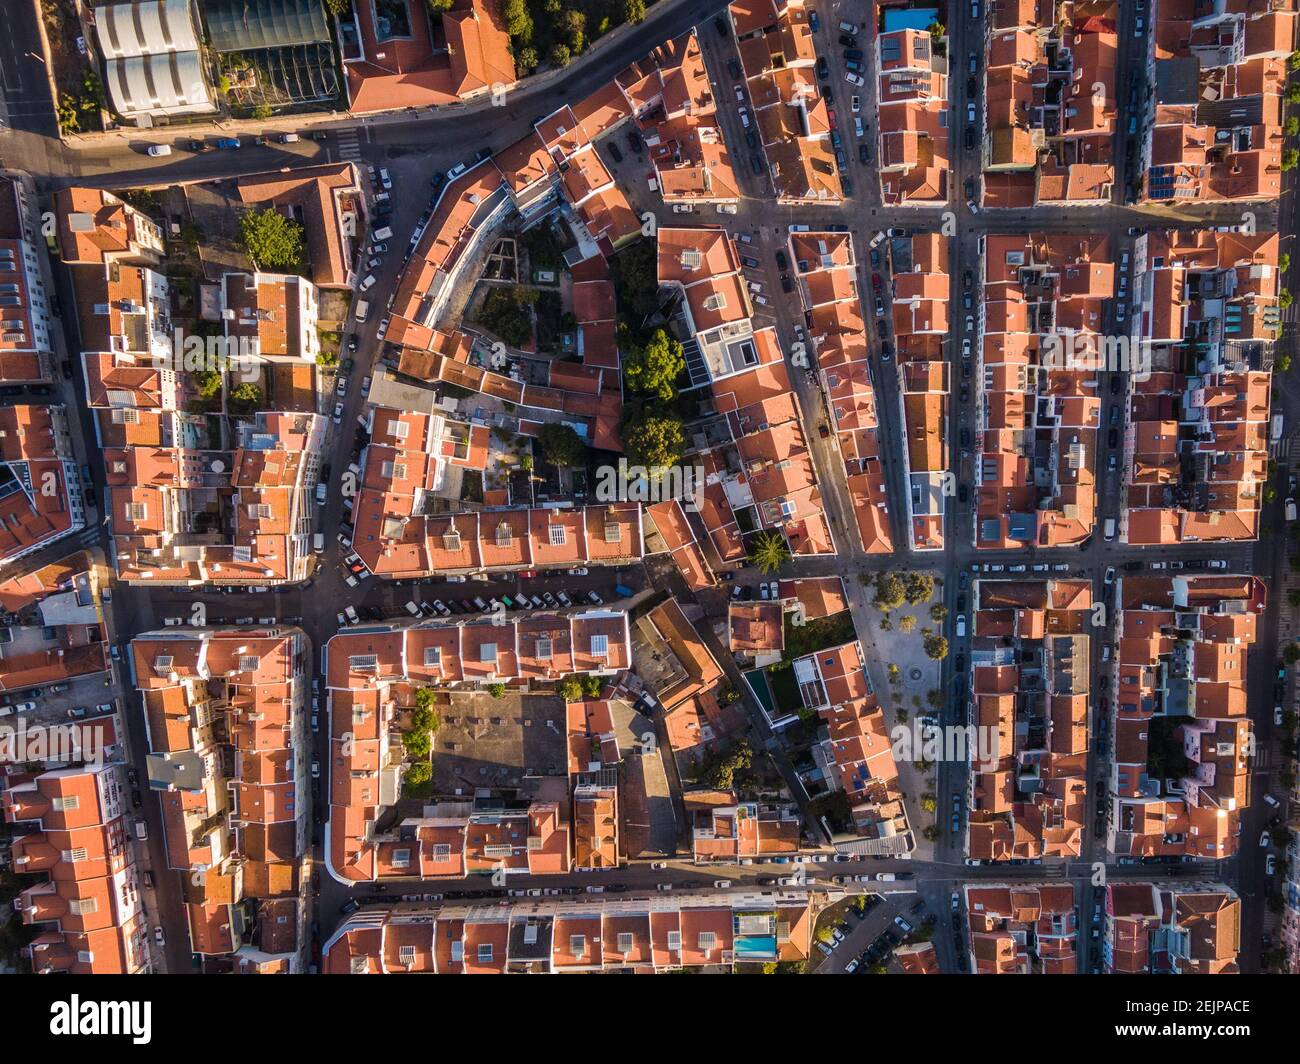 Aerial top down view of traditional residential neighbourhood at sunrise in the Belem District of Lisbon, Portugal. Stock Photo